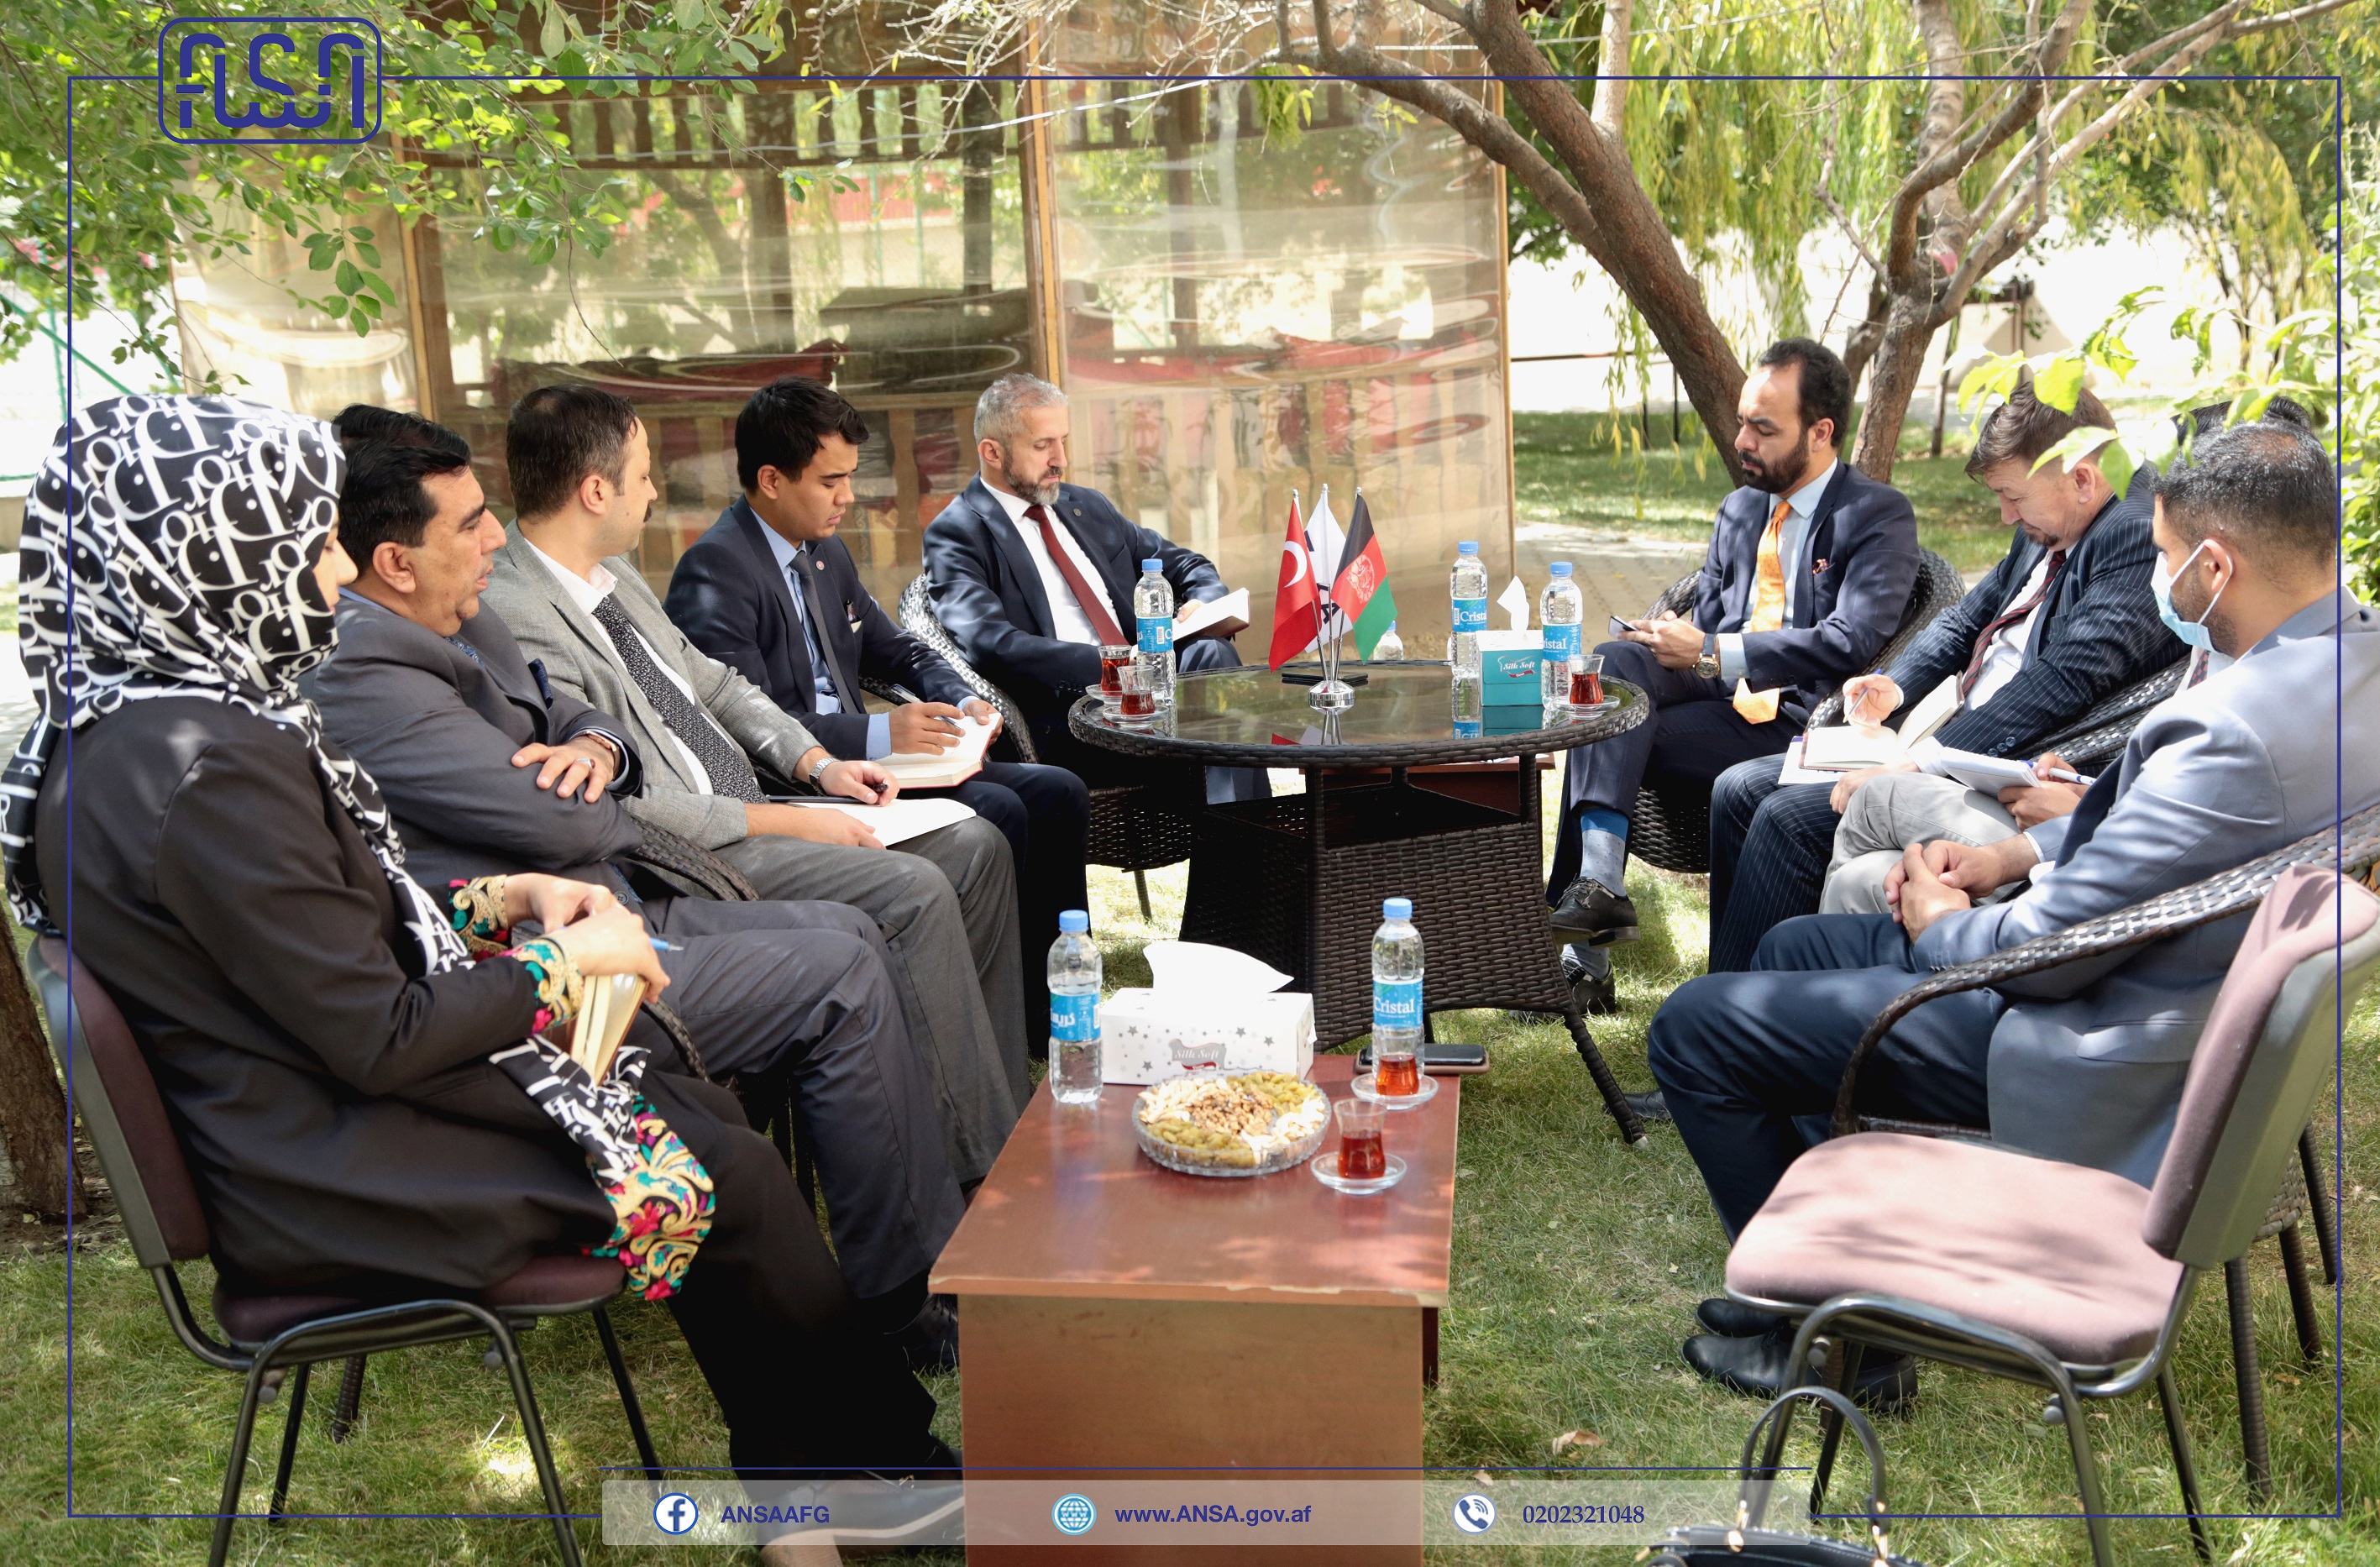 Afghanistan National Standards Authority held a joint meeting for bilateral cooperation between the agency of Coordination and Cooperation of the Islamic Republic of Turkey TIKA.